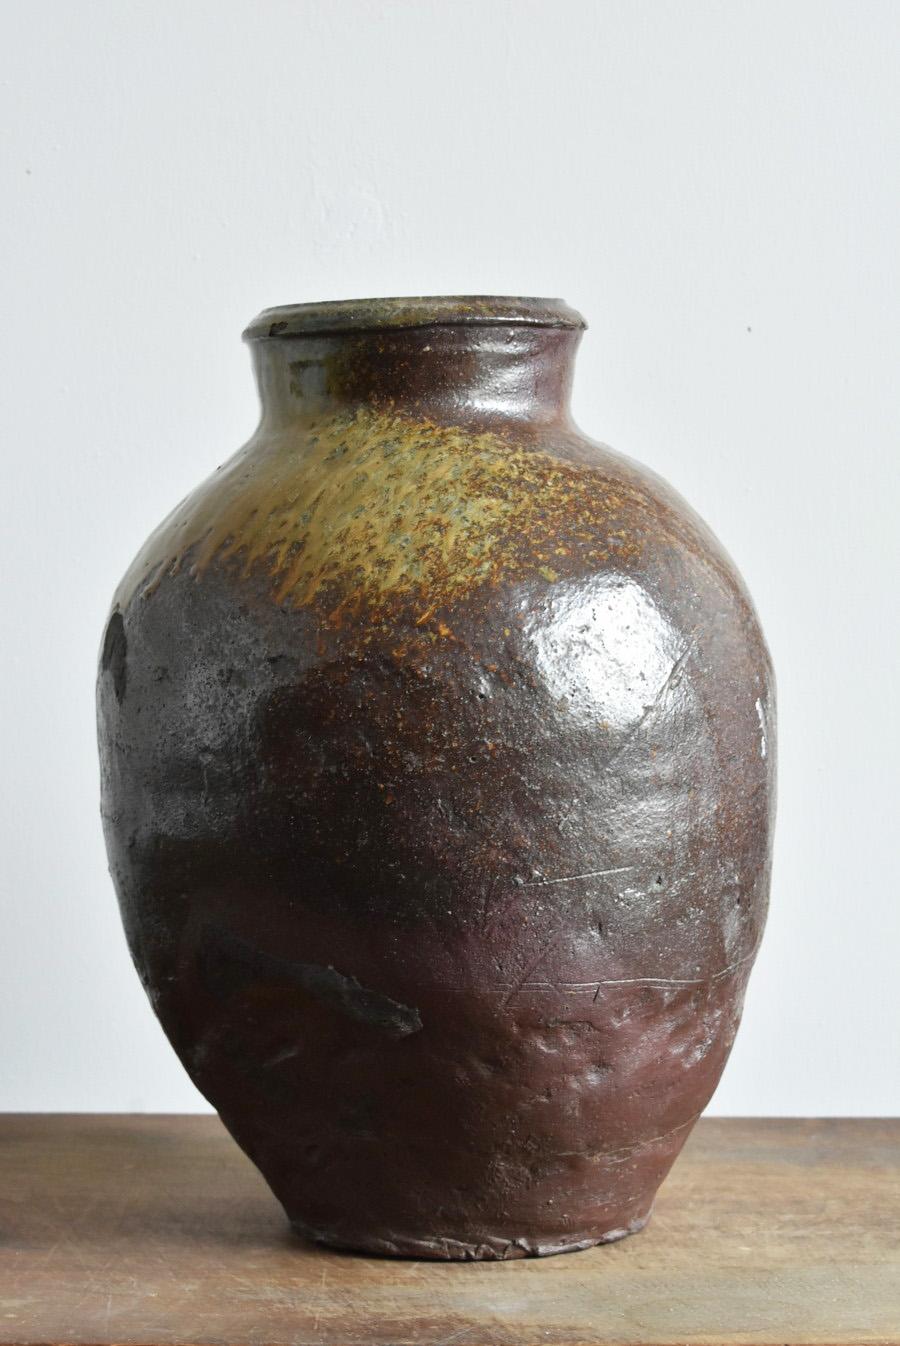 Other Japanese Antique Jar 1400s-1500s / Rare and Beautiful Vase 'Tokoname'